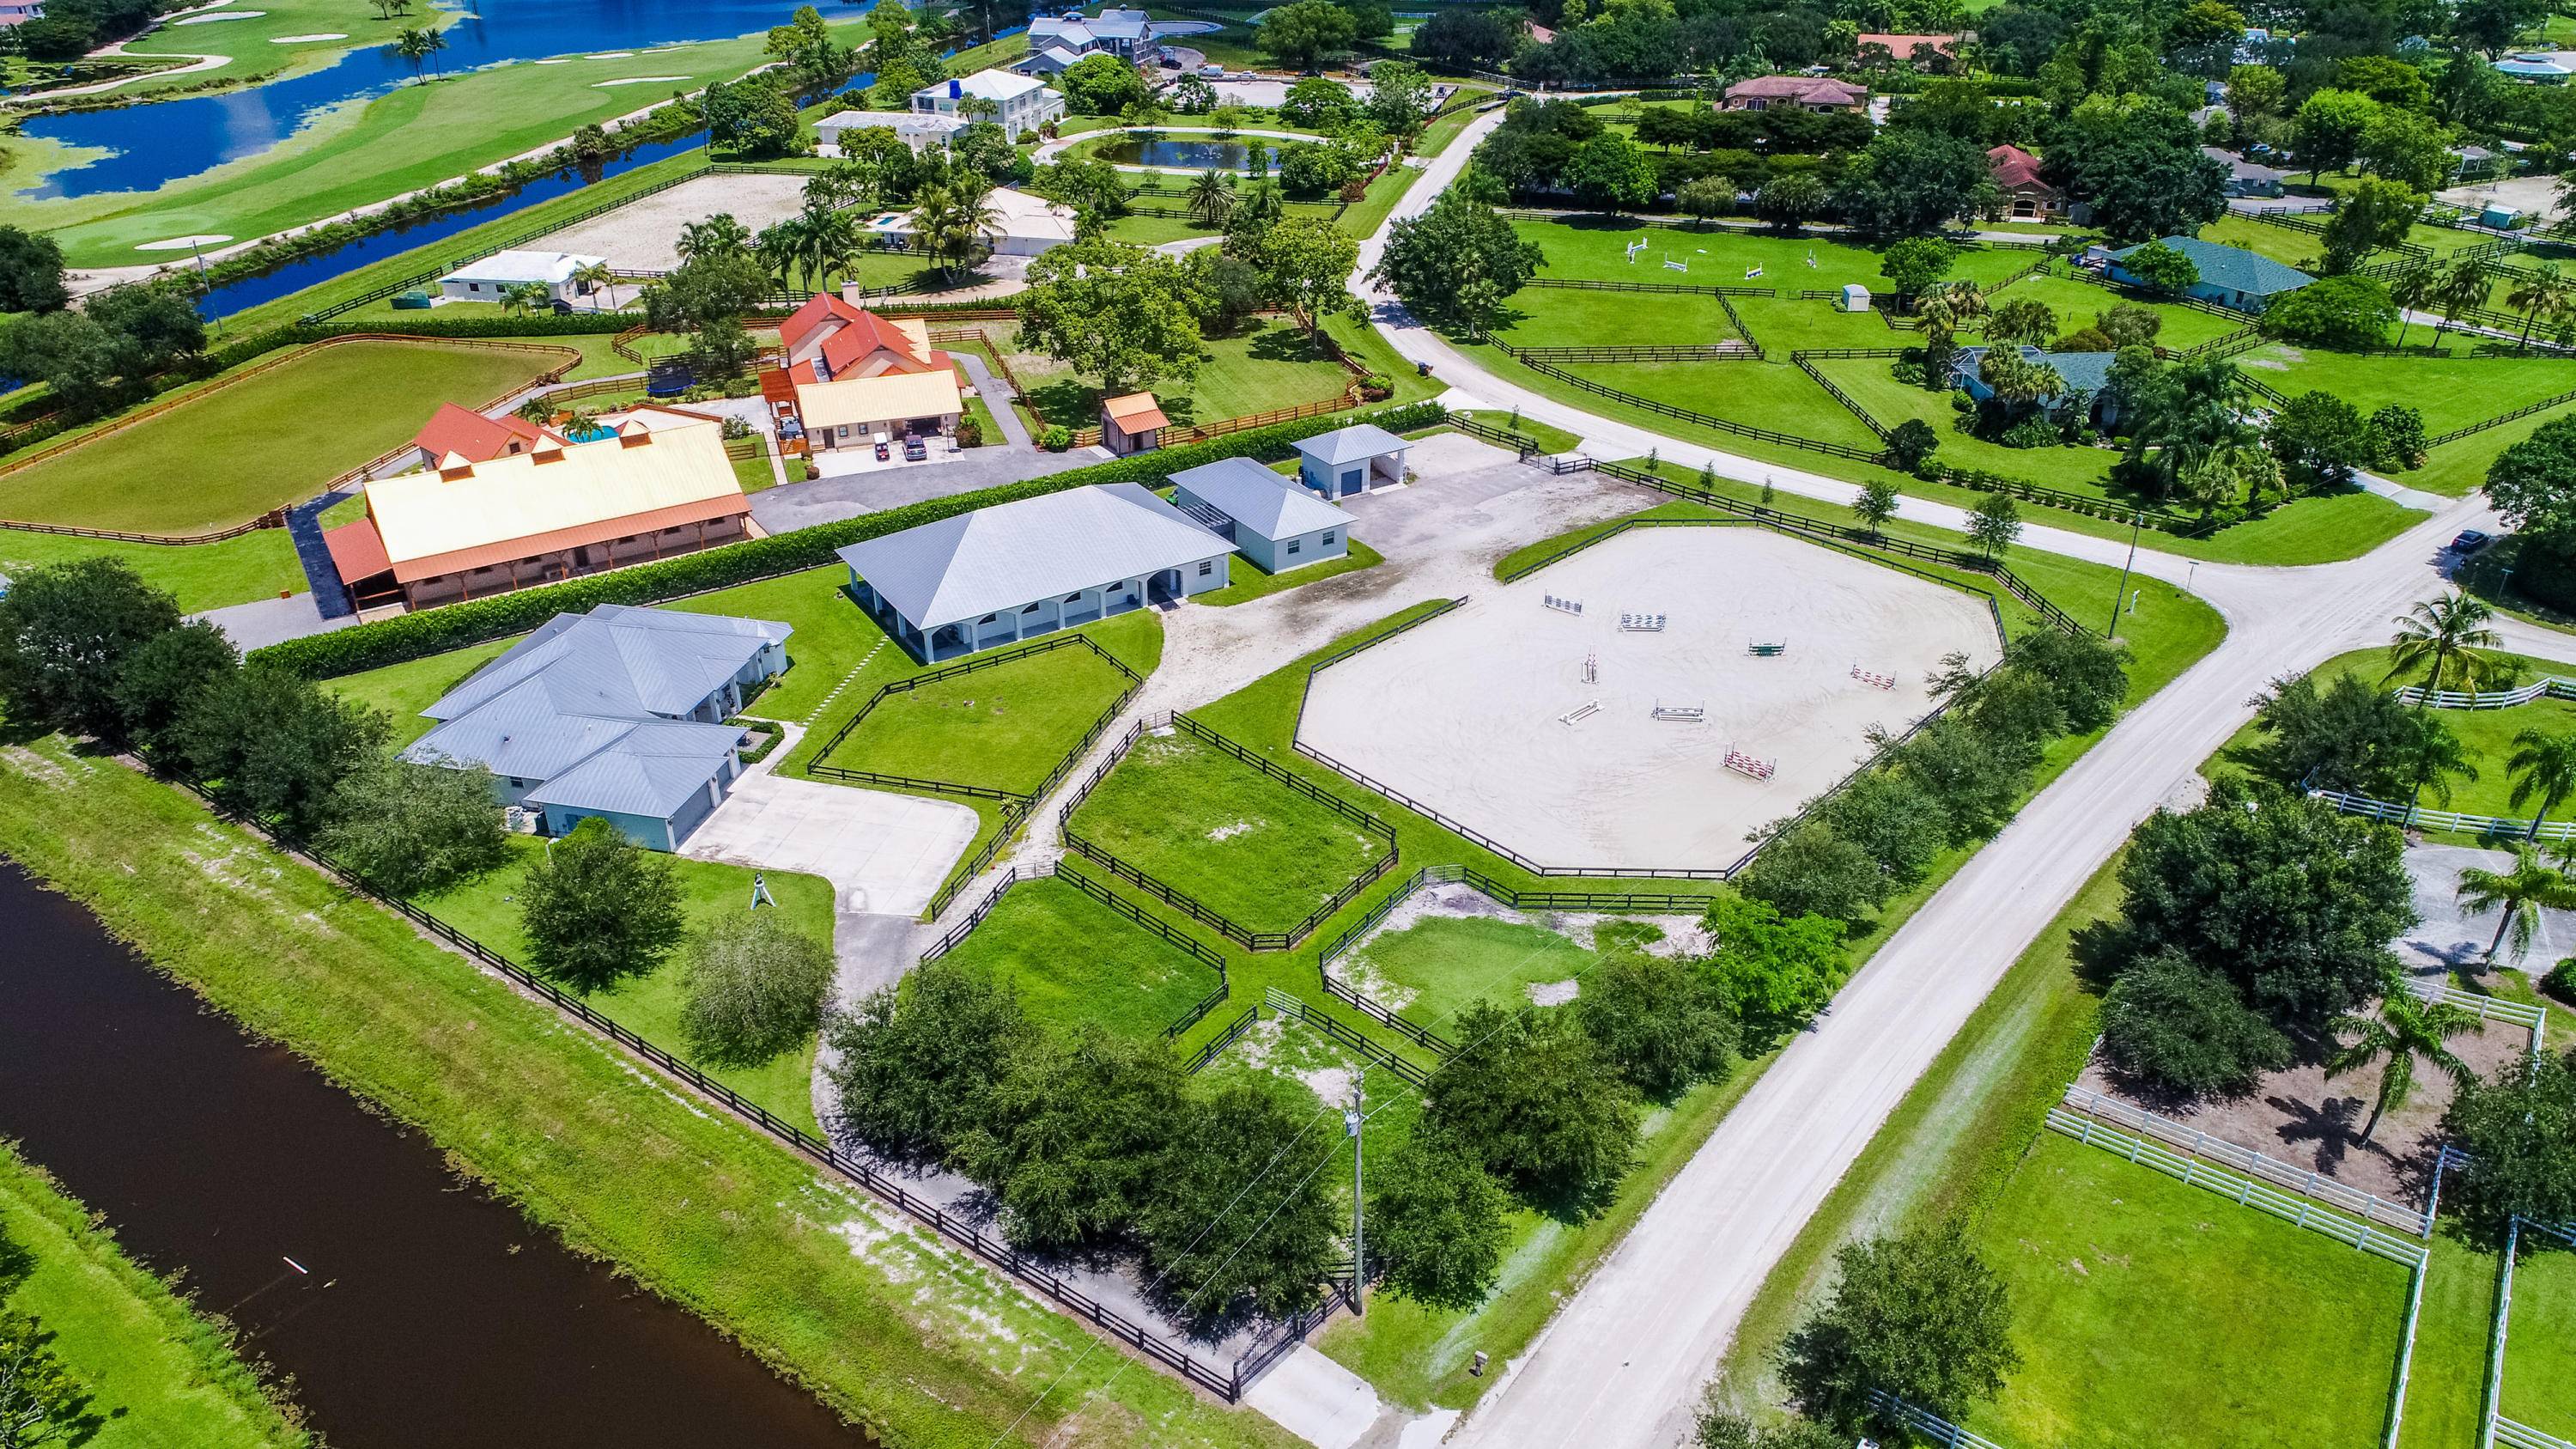 Kilkenny Farm is opening the gates once again for the 2024 2025 WEF season for you to enjoy this entire 8 stall barn in the sought after Saddle Trail Park ...